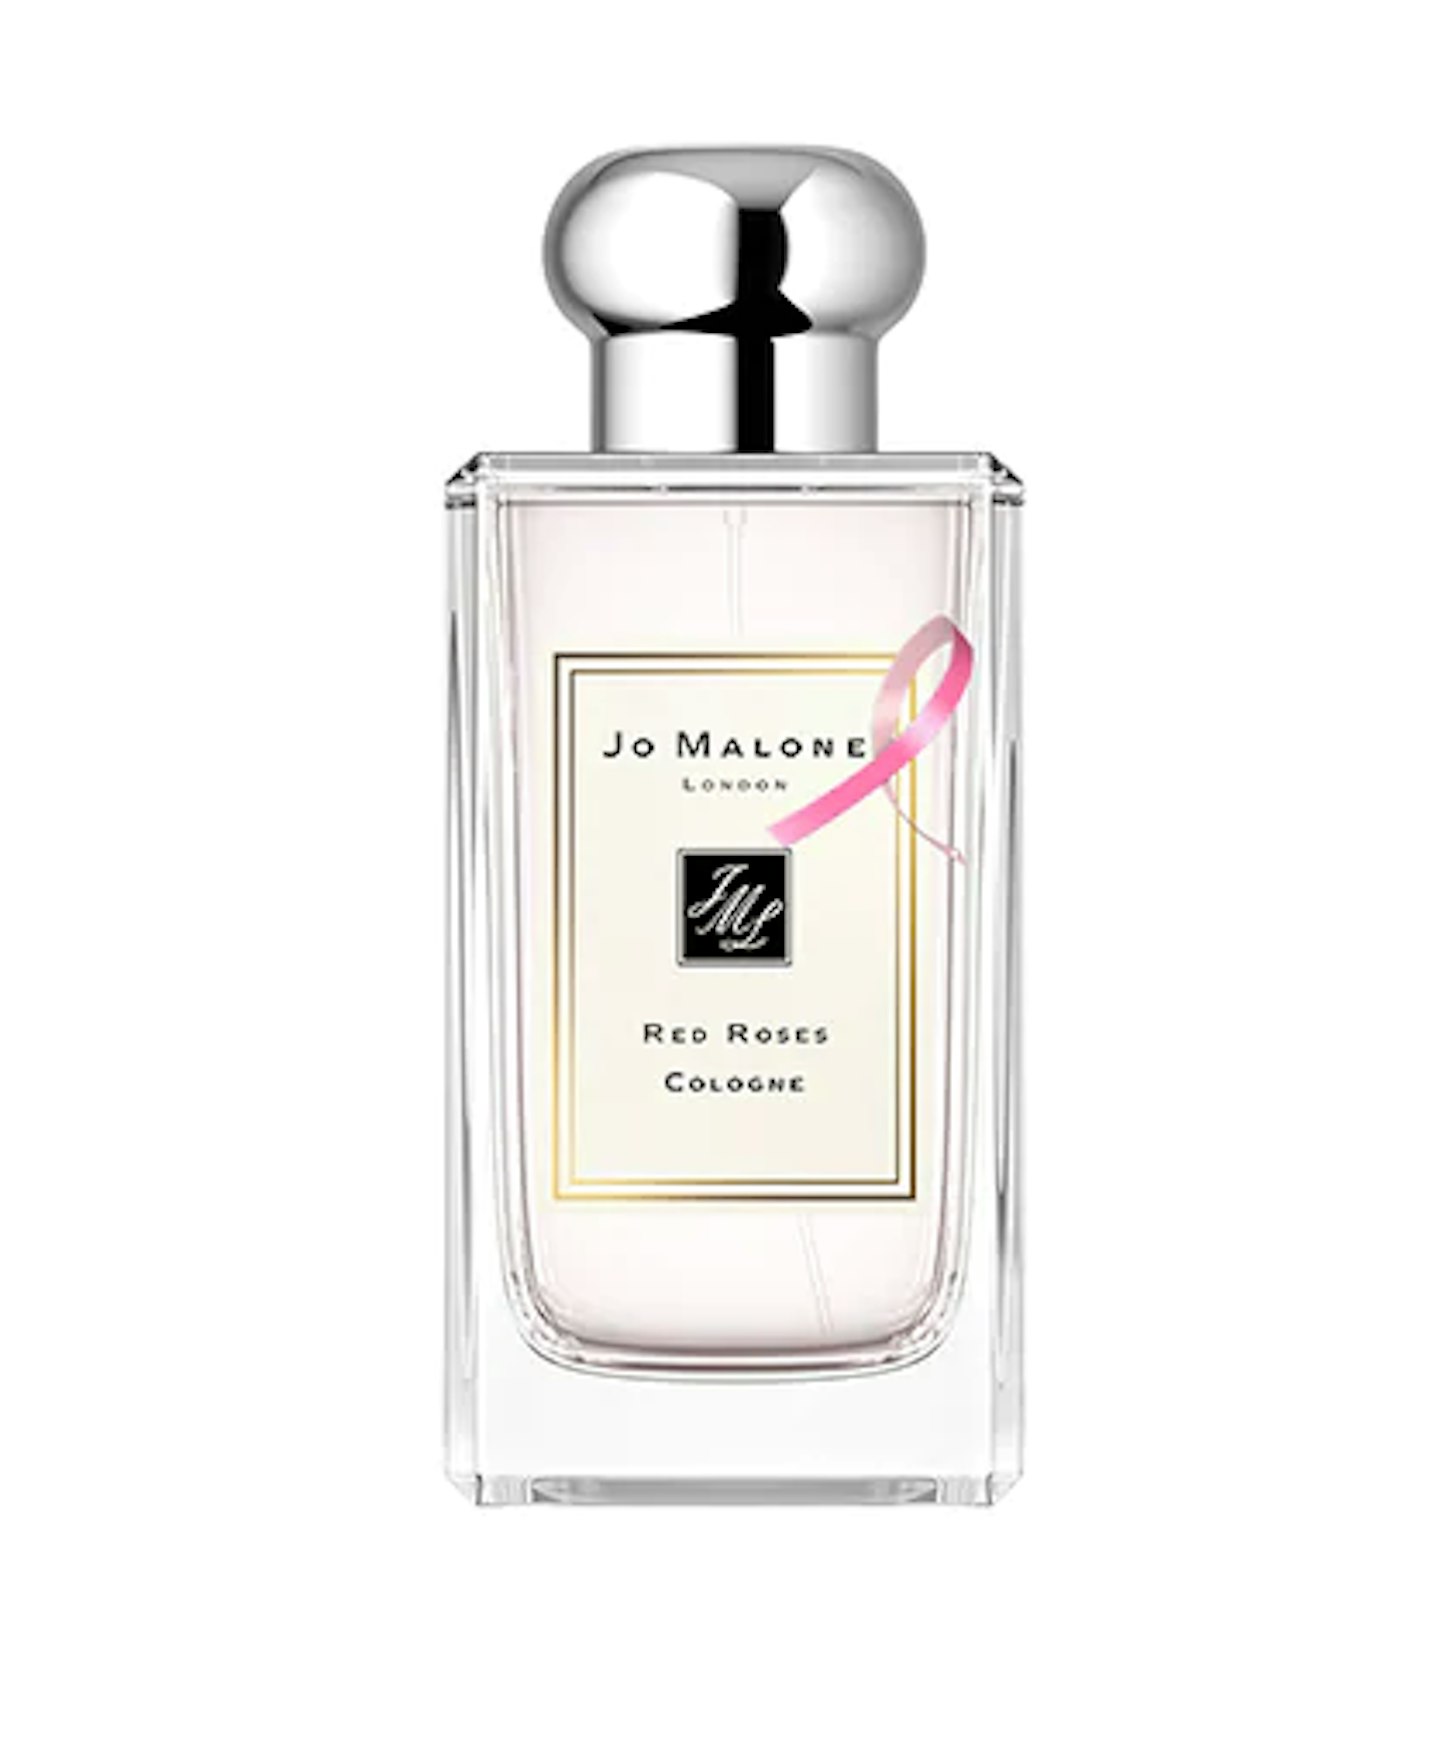 Jo Malone Red Roses 100ml Cologne, £98